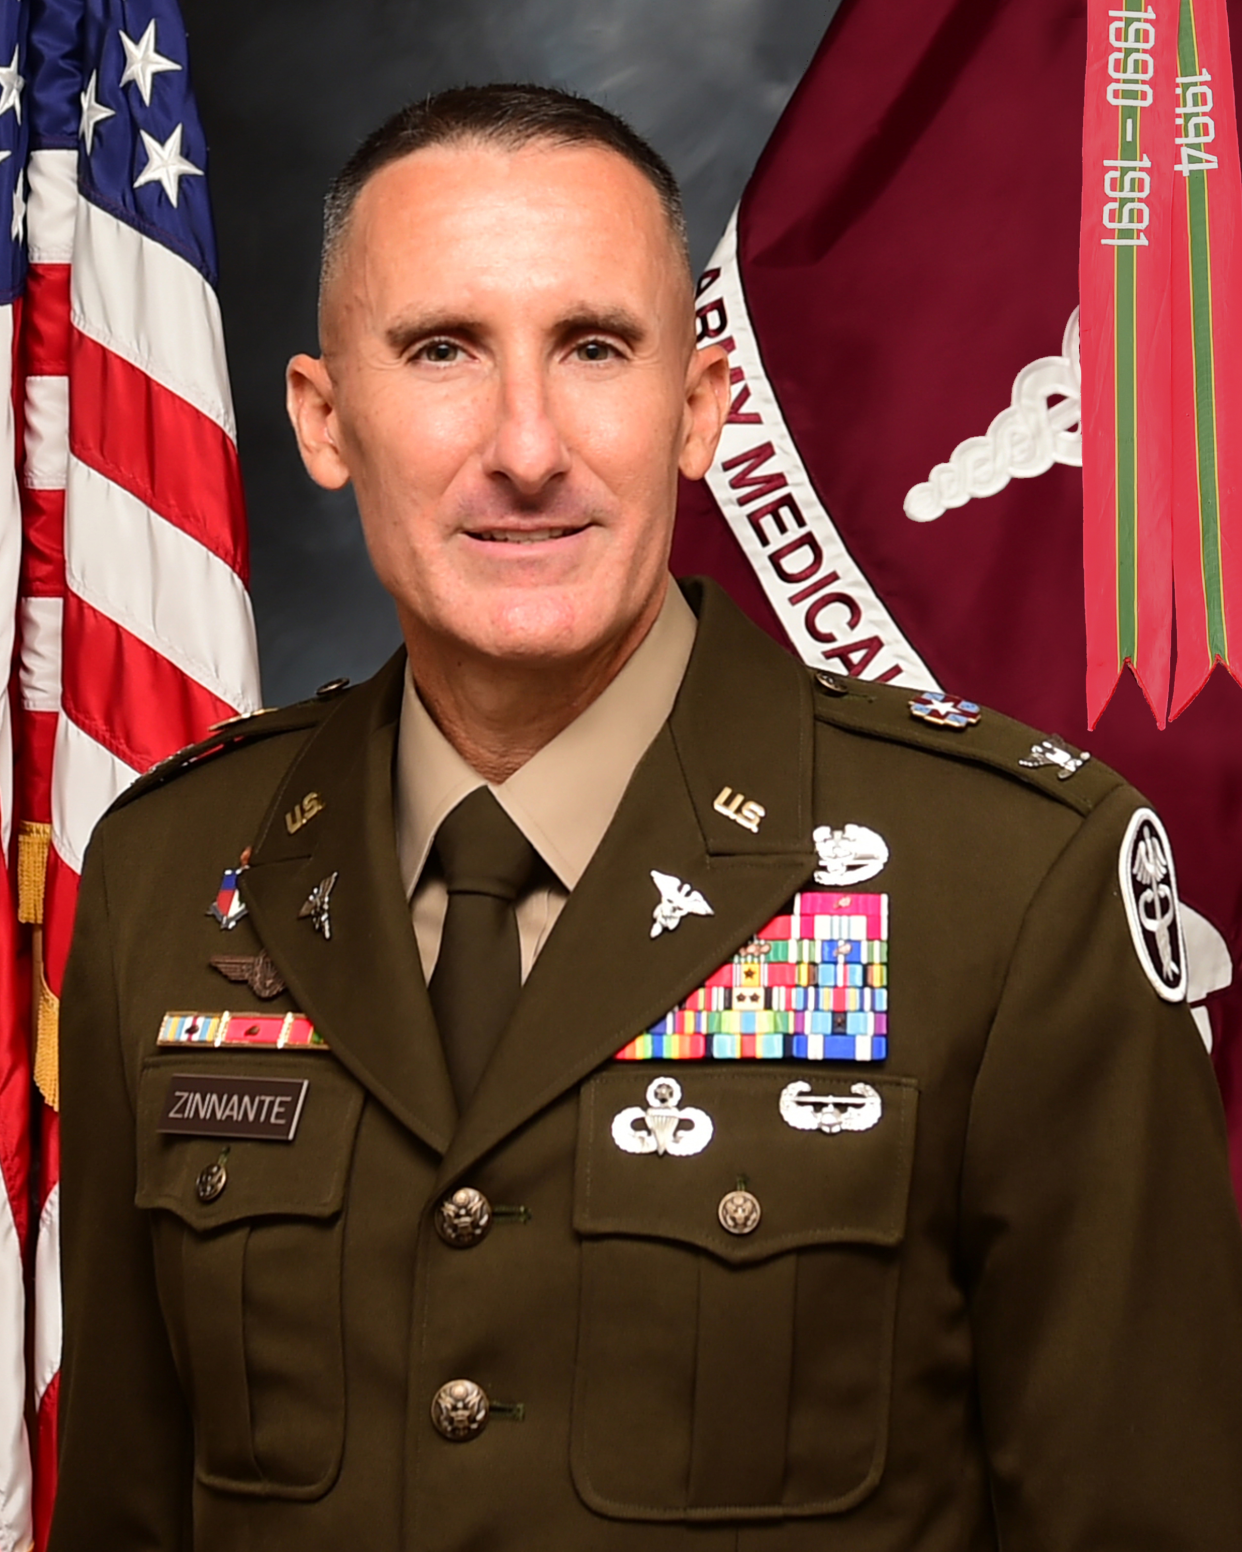 Col. David Zinnante took command of Womack Army Medical Center at Fort Bragg on July 6, 2022.